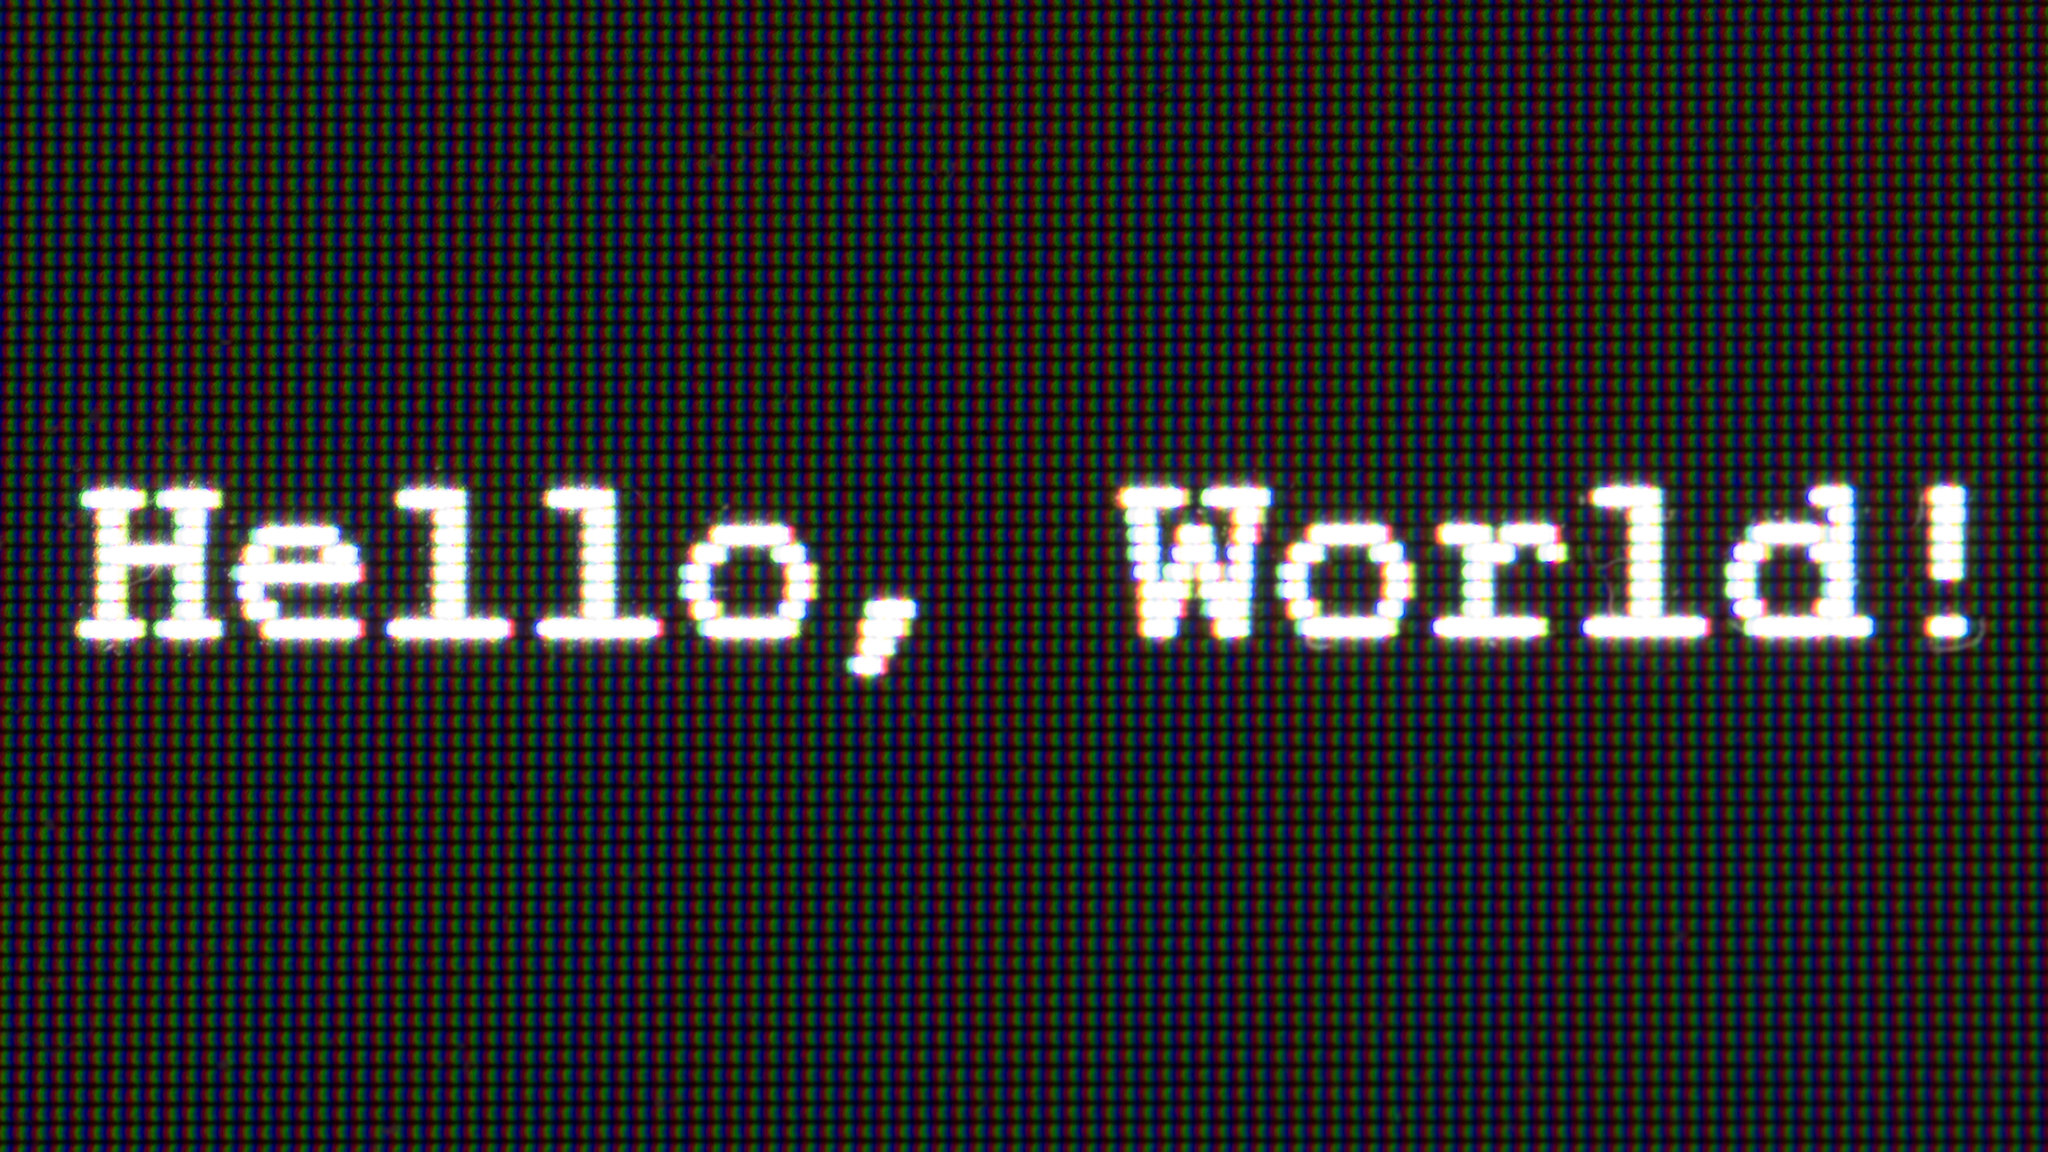 close up of a computer screen showing pixels that reads hello world